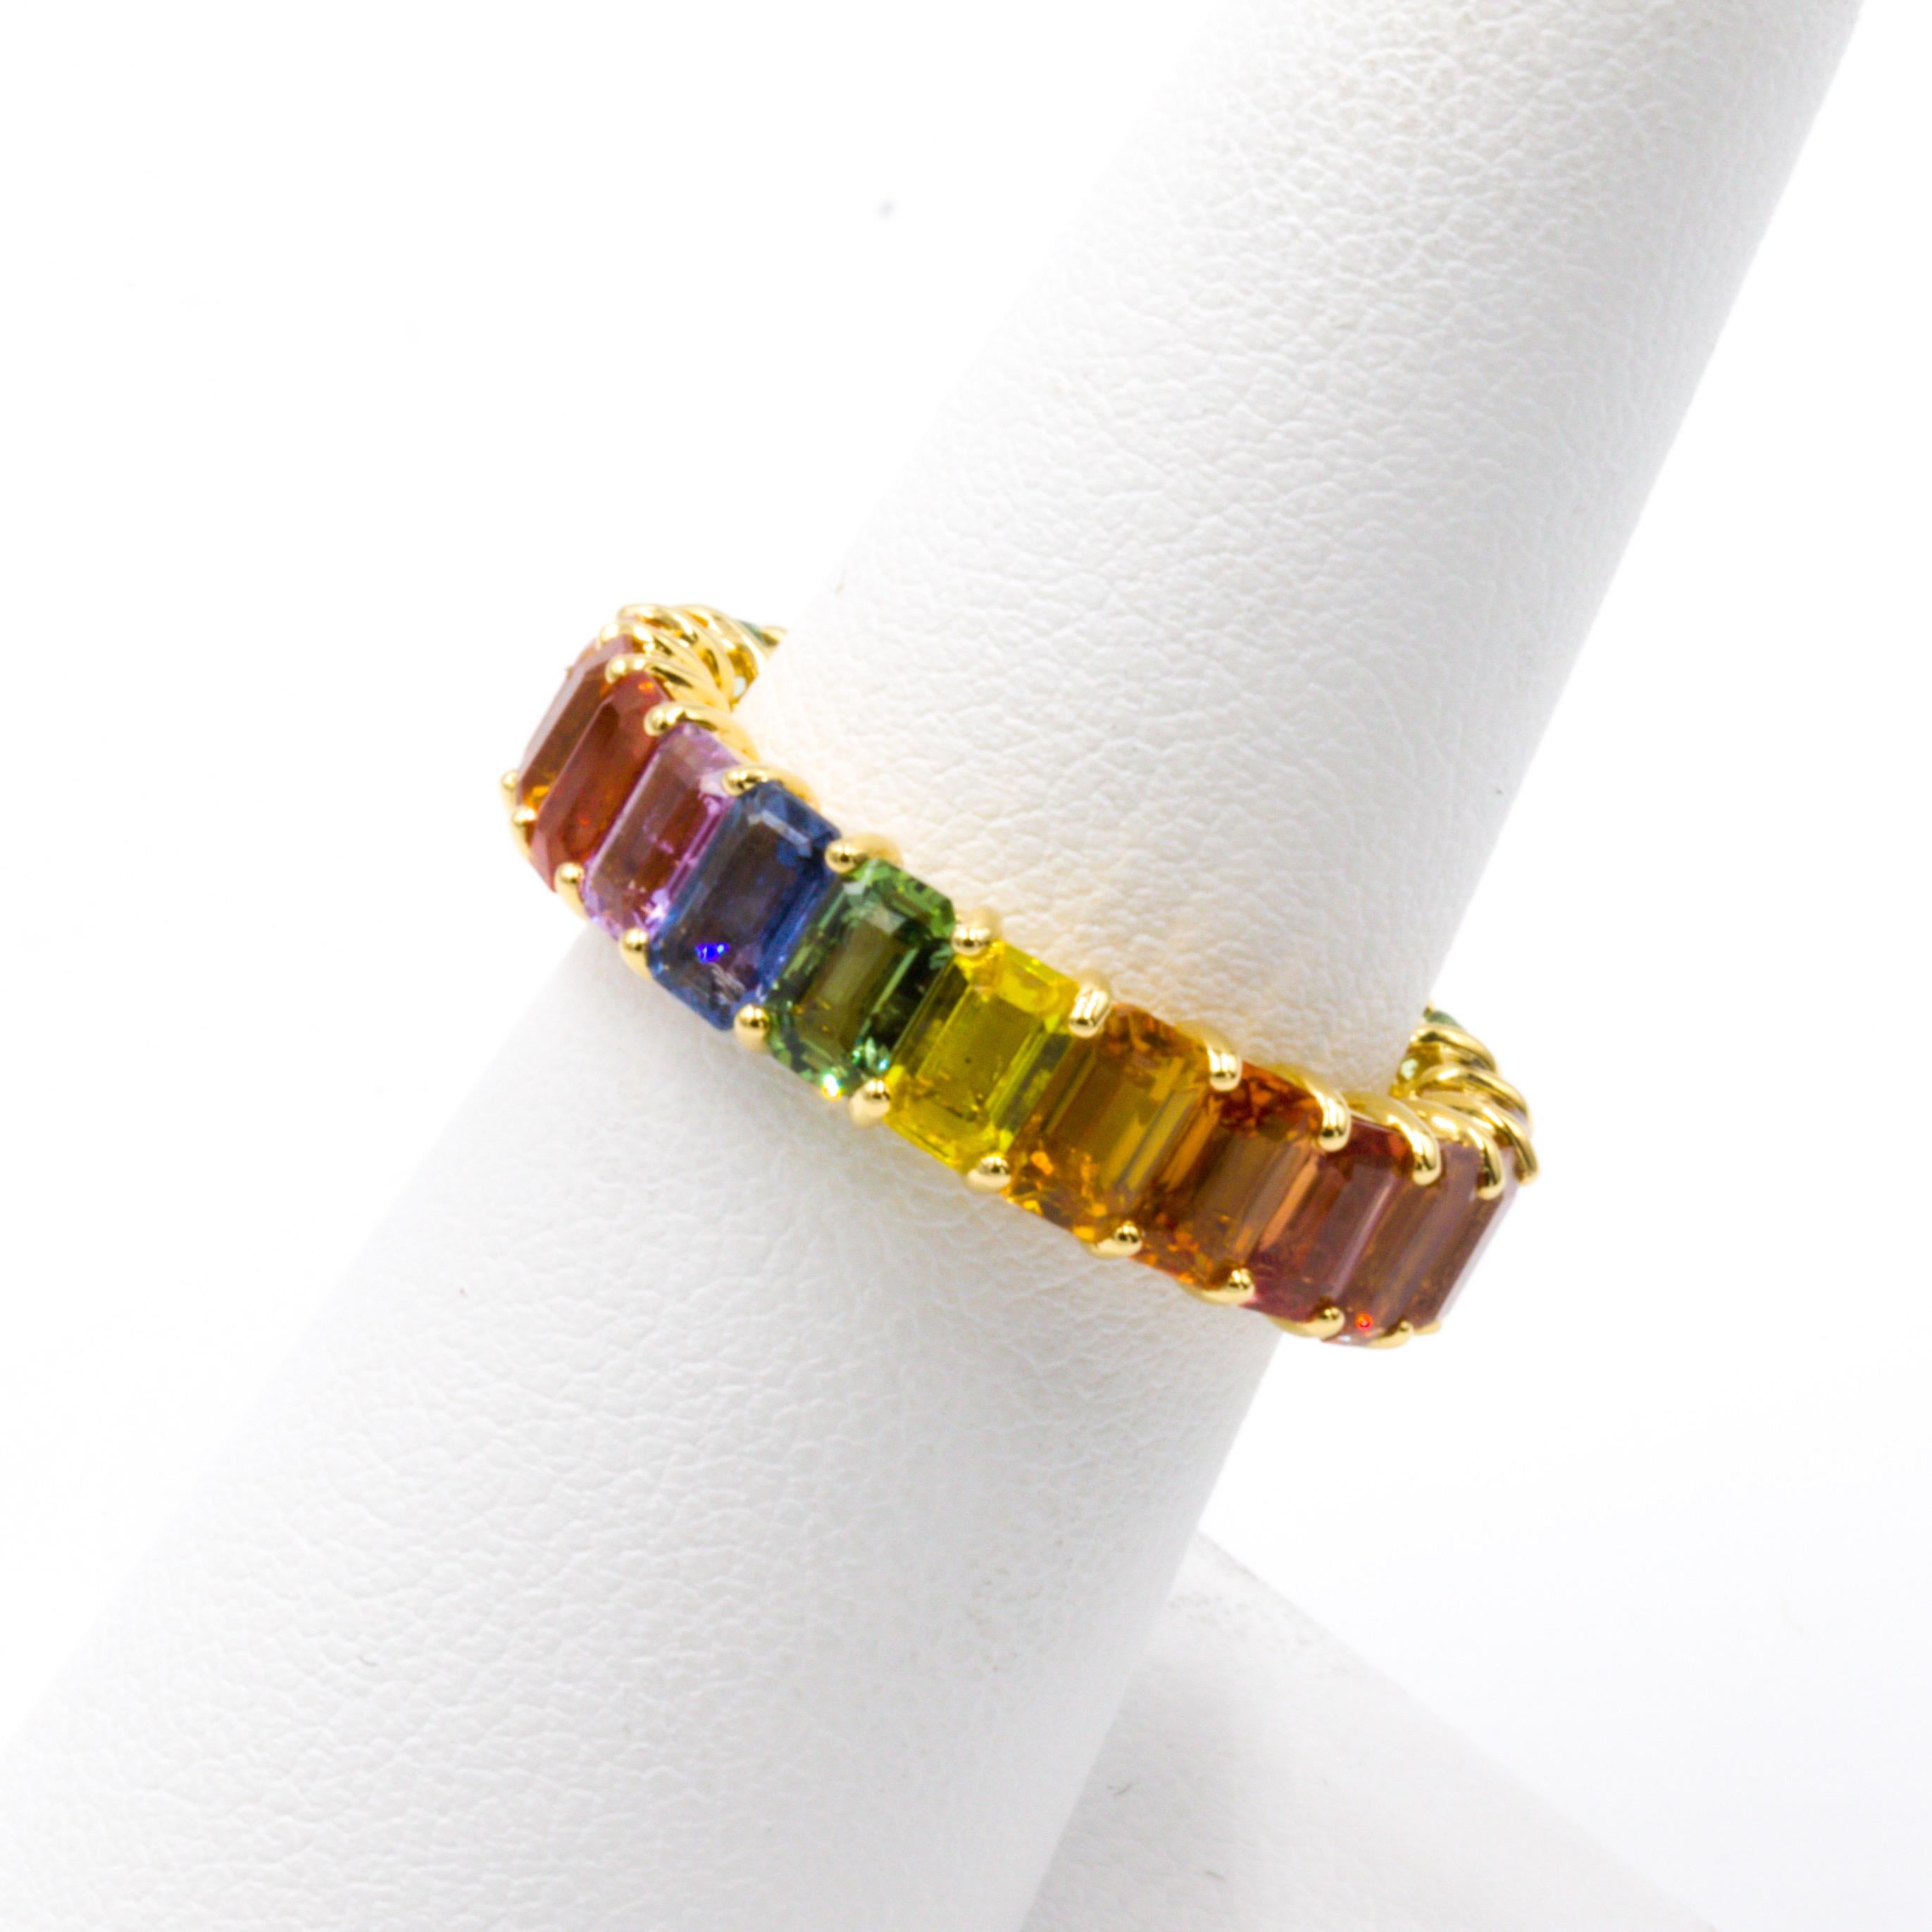 Sapphire occurs naturally in a wide variety of colors. This ring shows them all off in one place! The 23 emerald cut fancy color sapphires in this eternity band have exceptional color. This ring will look amazing regardless of which size faces